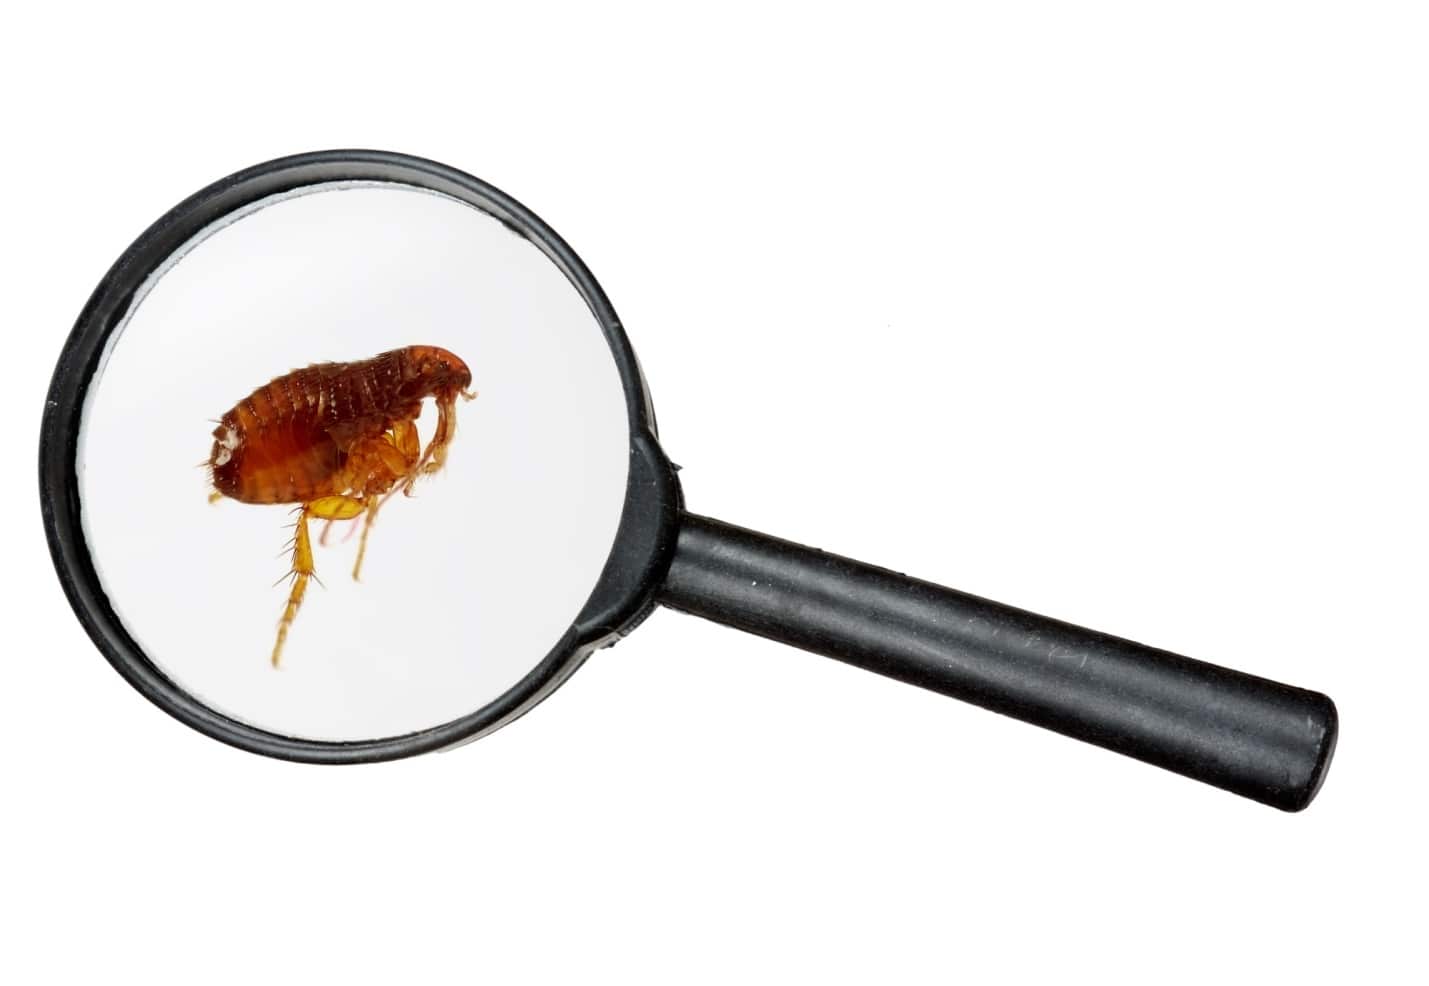 How to Get Rid of Fleas Safely and Fast. The flea under the magnifier